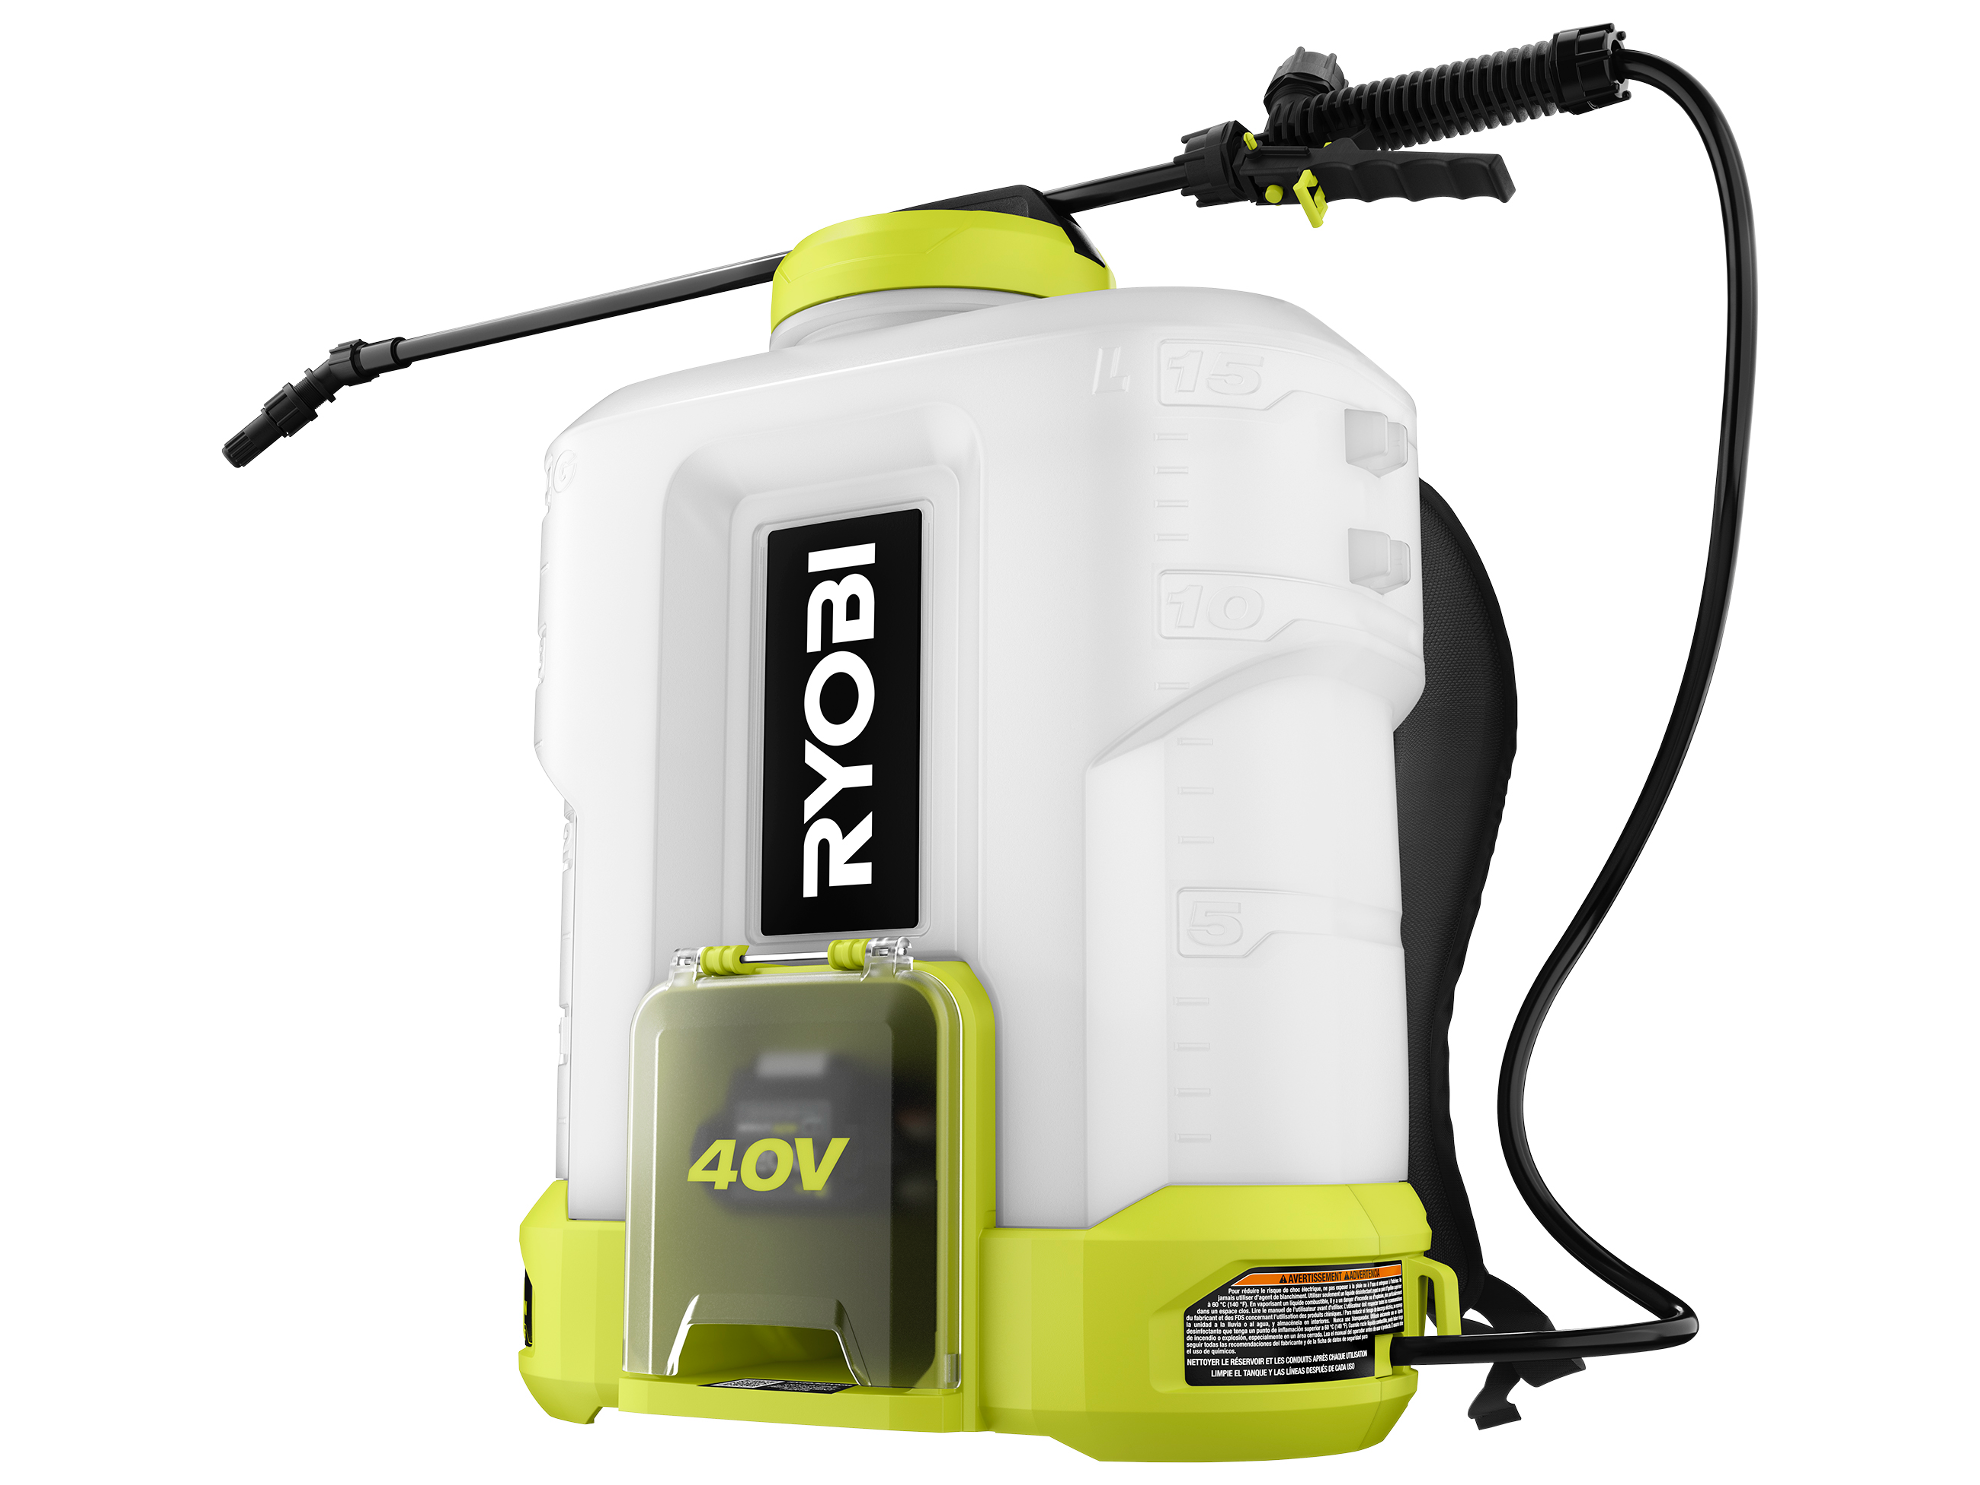 Product Features Image for 40V 4 GALLON BACKPACK CHEMICAL SPRAYER KIT.